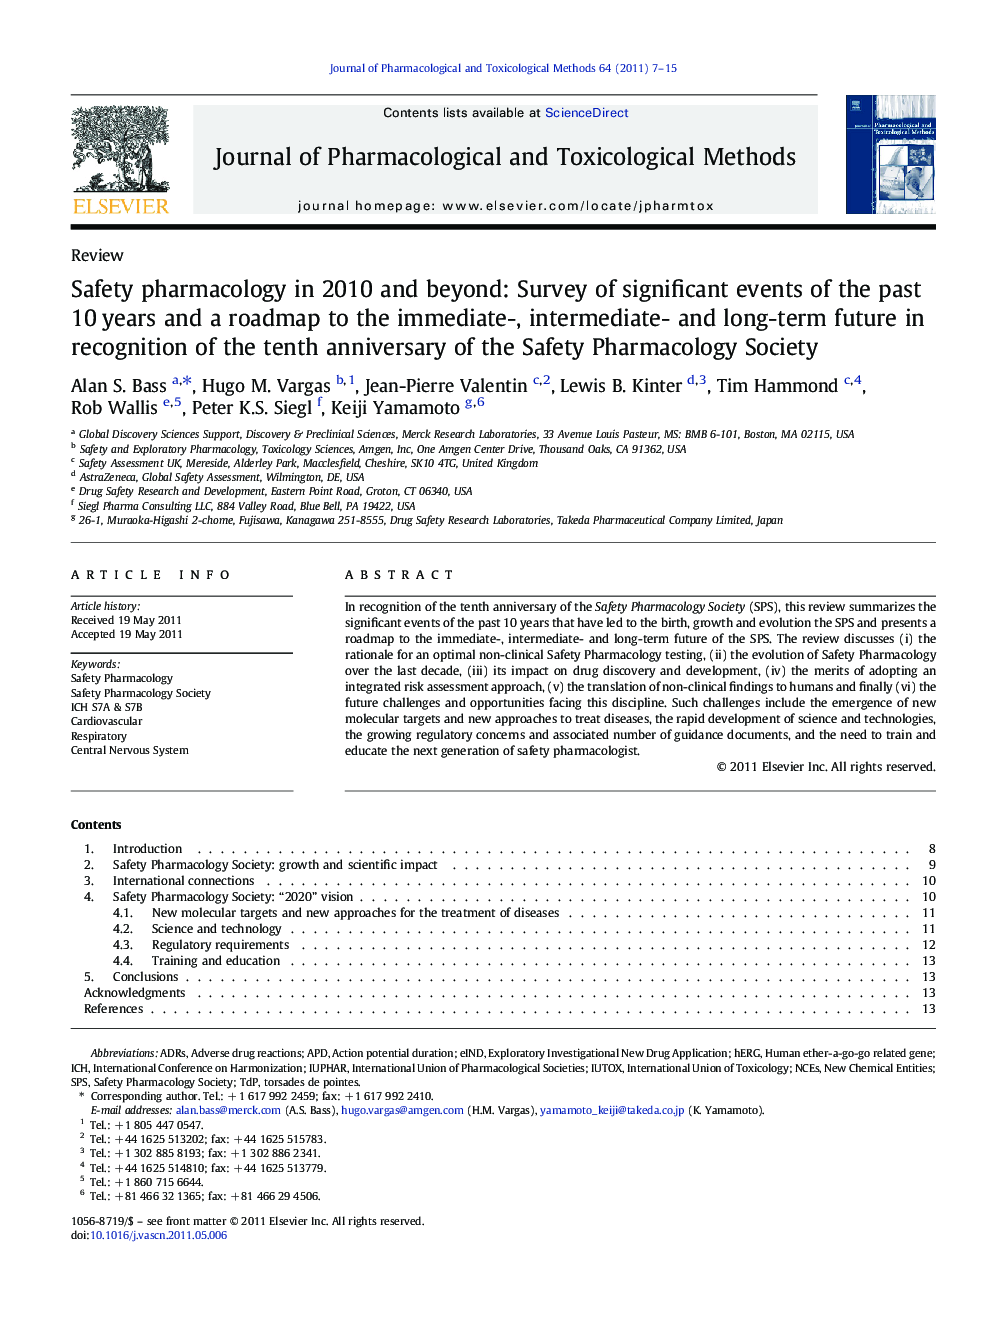 Safety pharmacology in 2010 and beyond: Survey of significant events of the past 10 years and a roadmap to the immediate-, intermediate- and long-term future in recognition of the tenth anniversary of the Safety Pharmacology Society